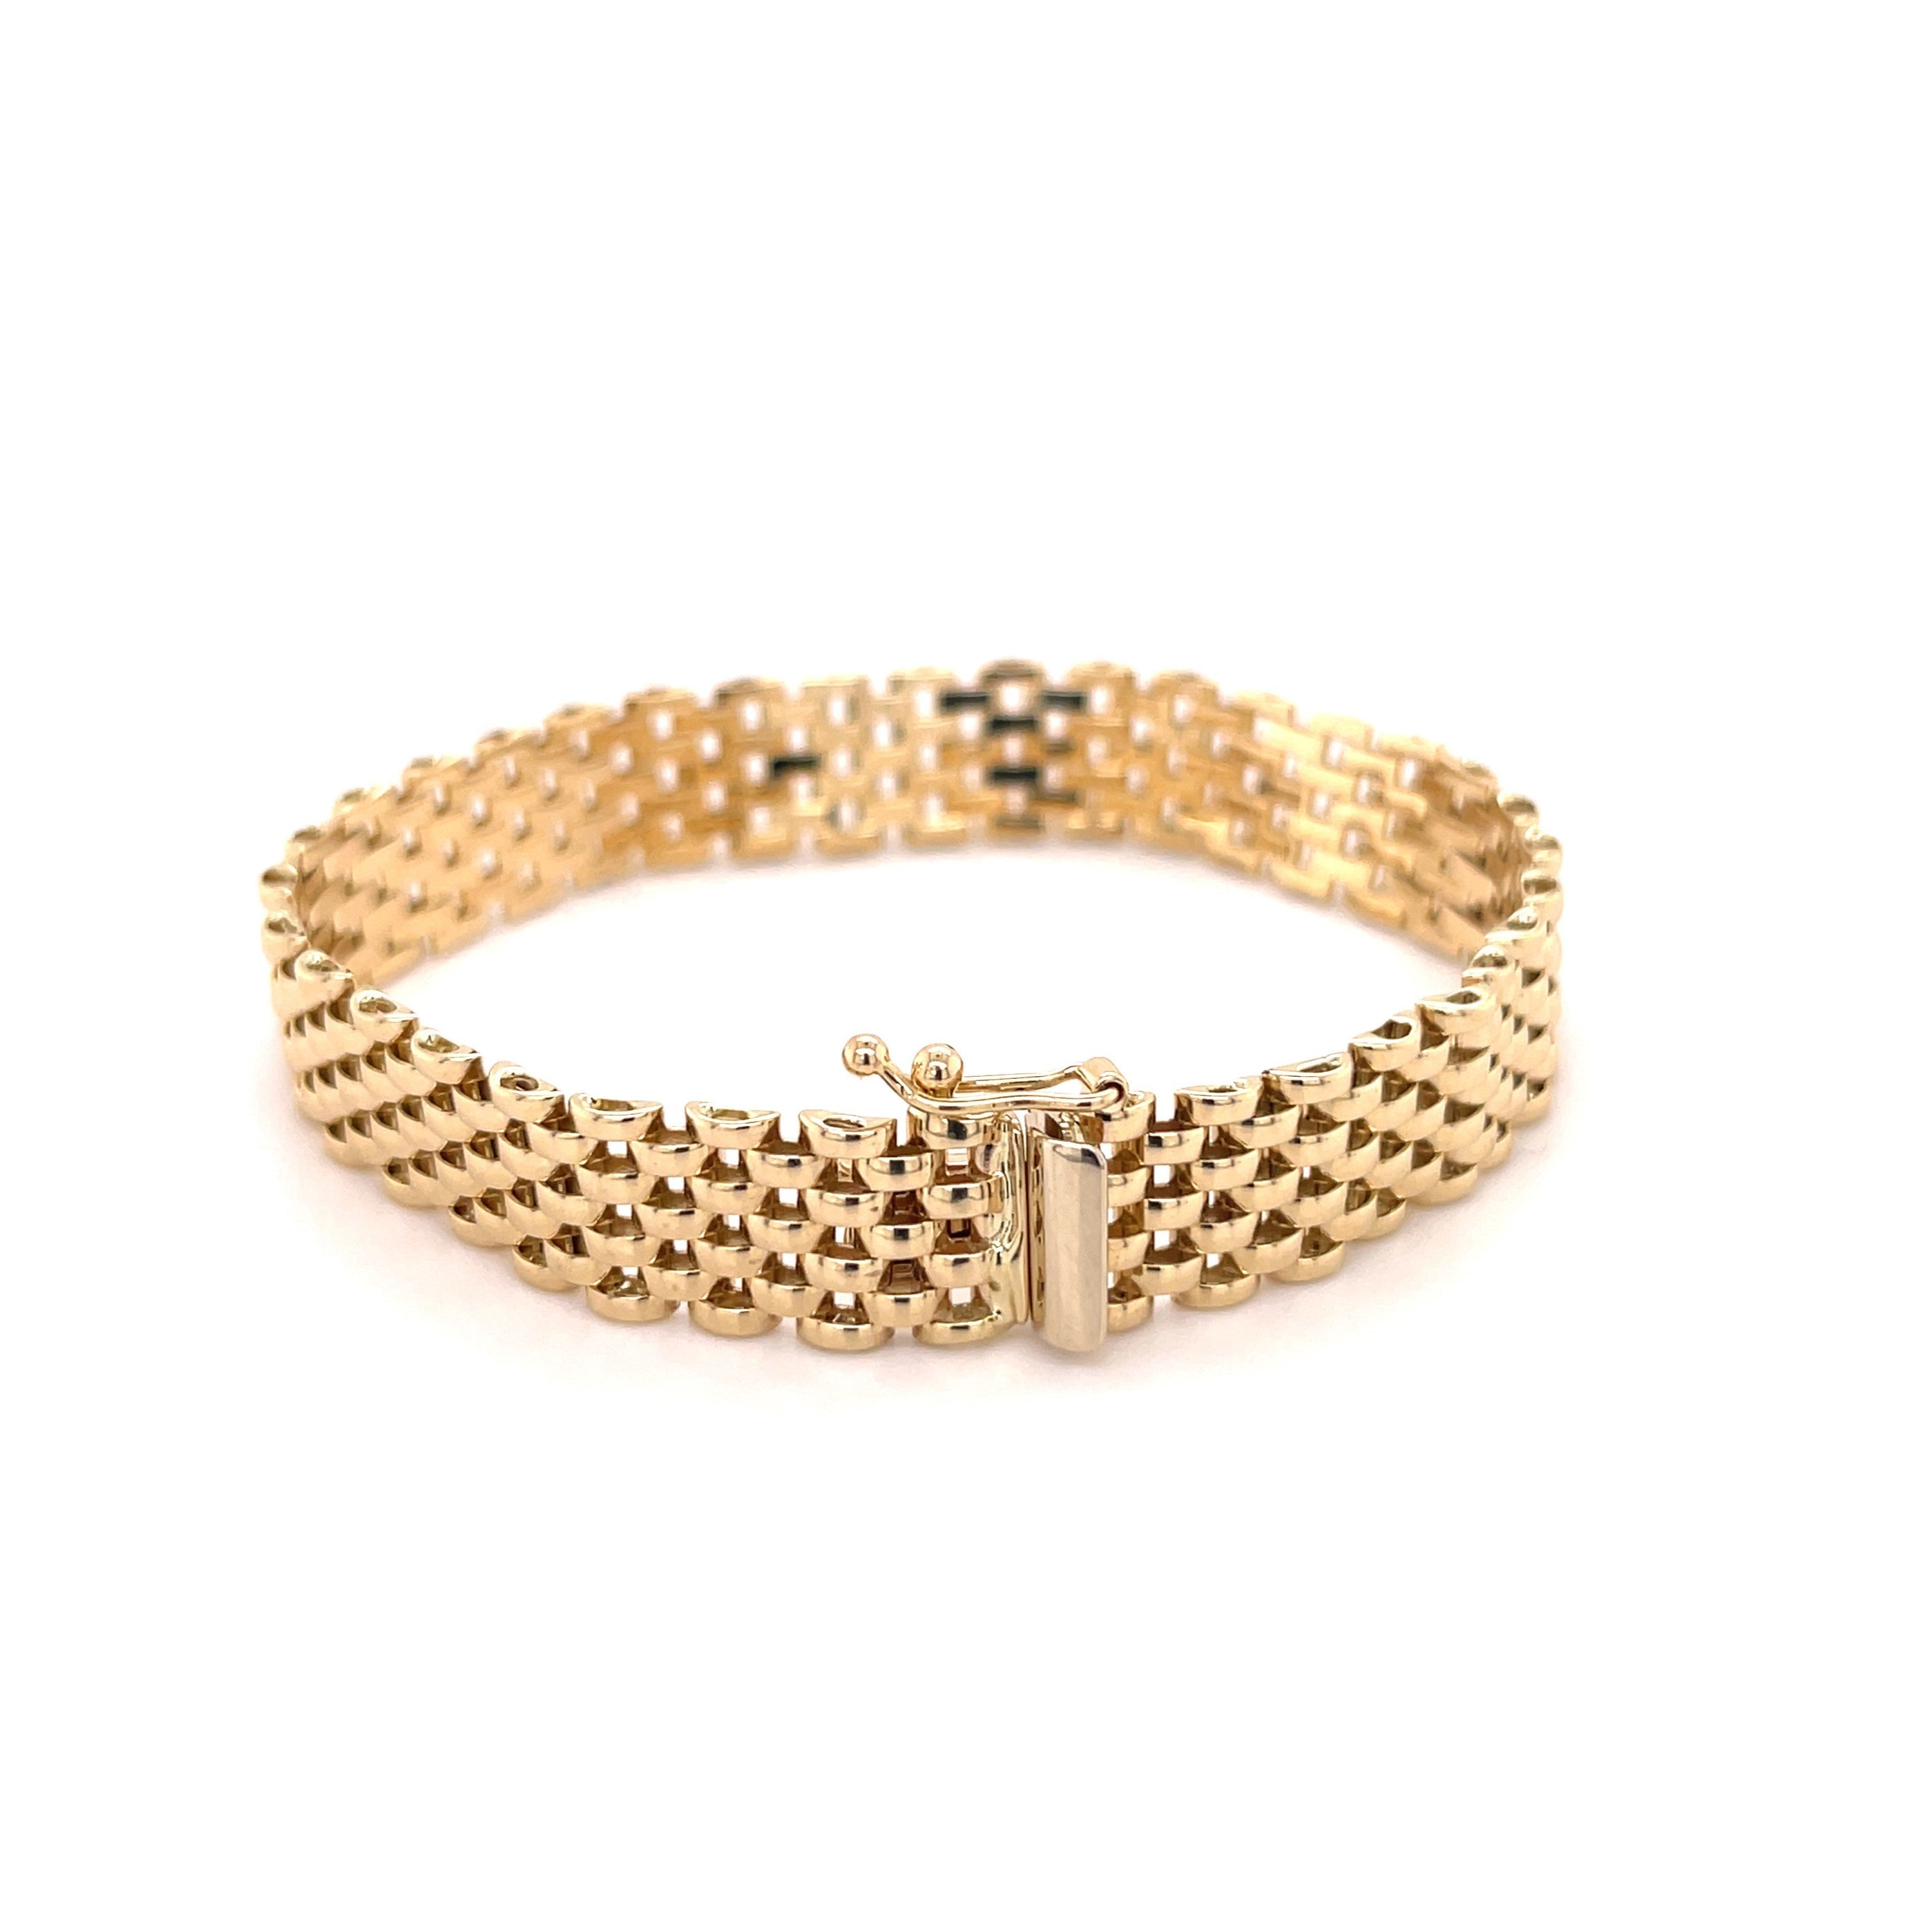 14K YELLOW GOLD 9 MM THICK PANTHER LINK BRACELET